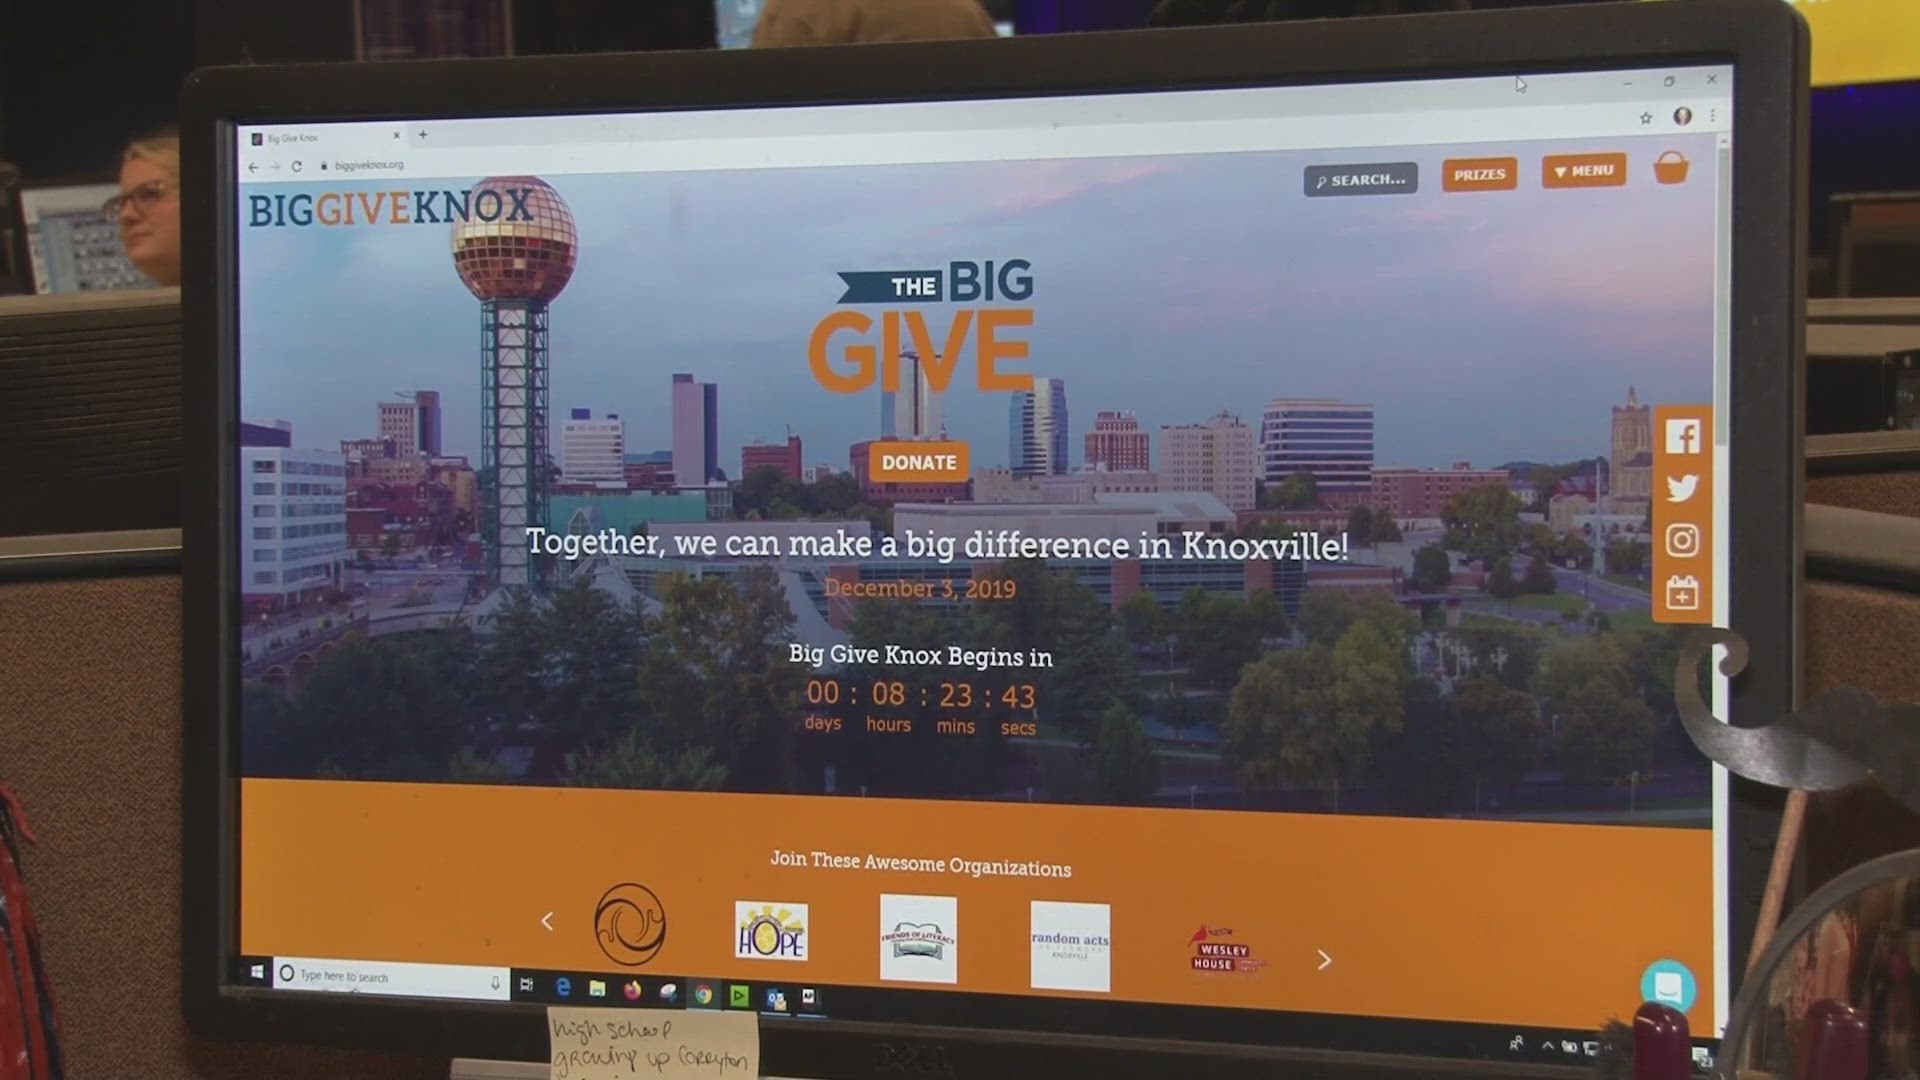 This is the fifth year for The Big Give. You can visit the Big Give Knoxville website to donate.